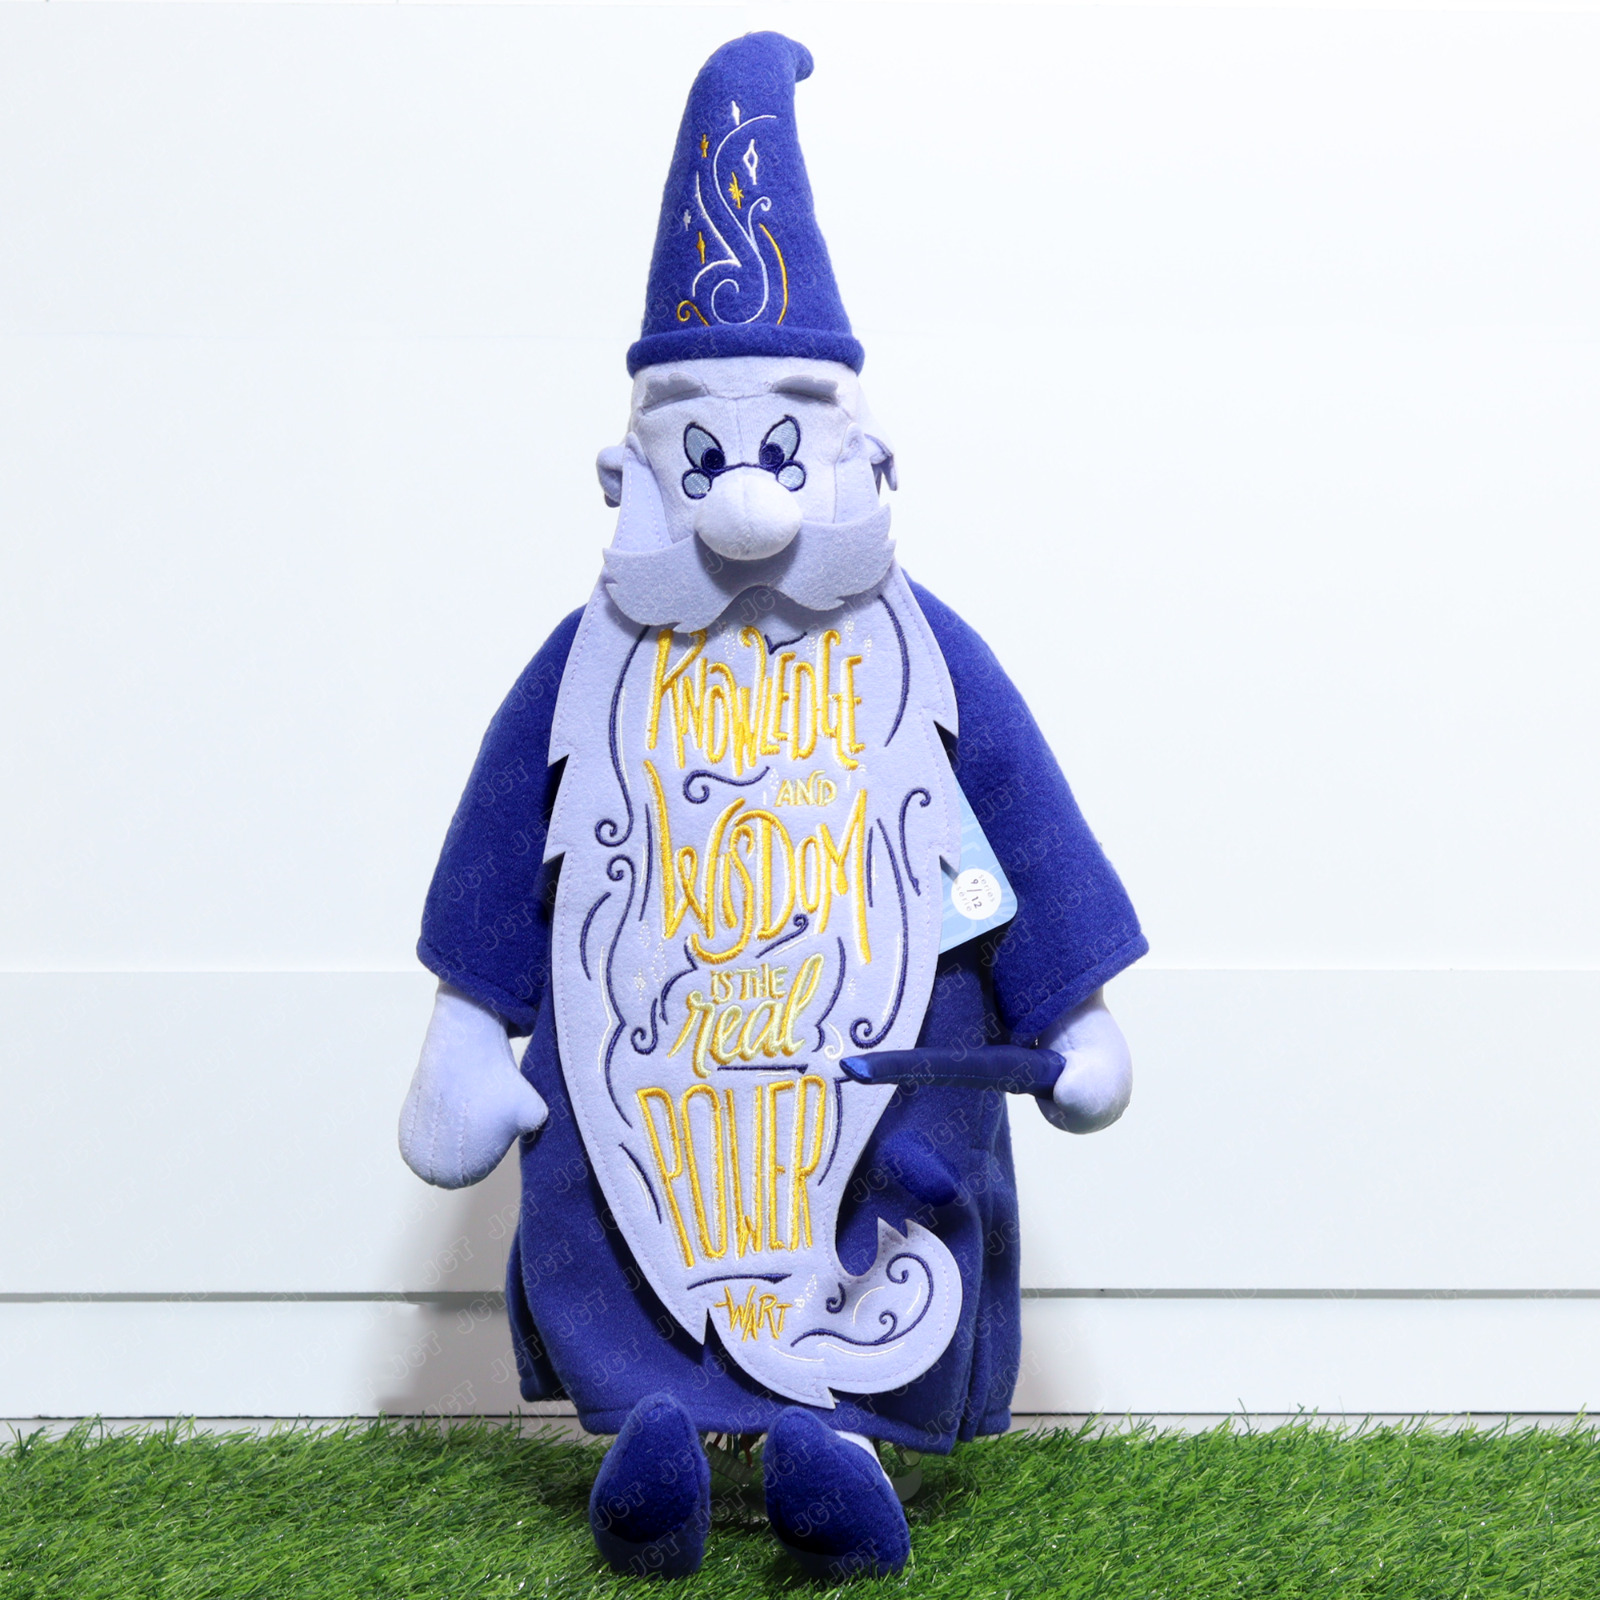 Disney Store Wisdom Collection – Merlin Plush - The Sword in the Stone - 20\